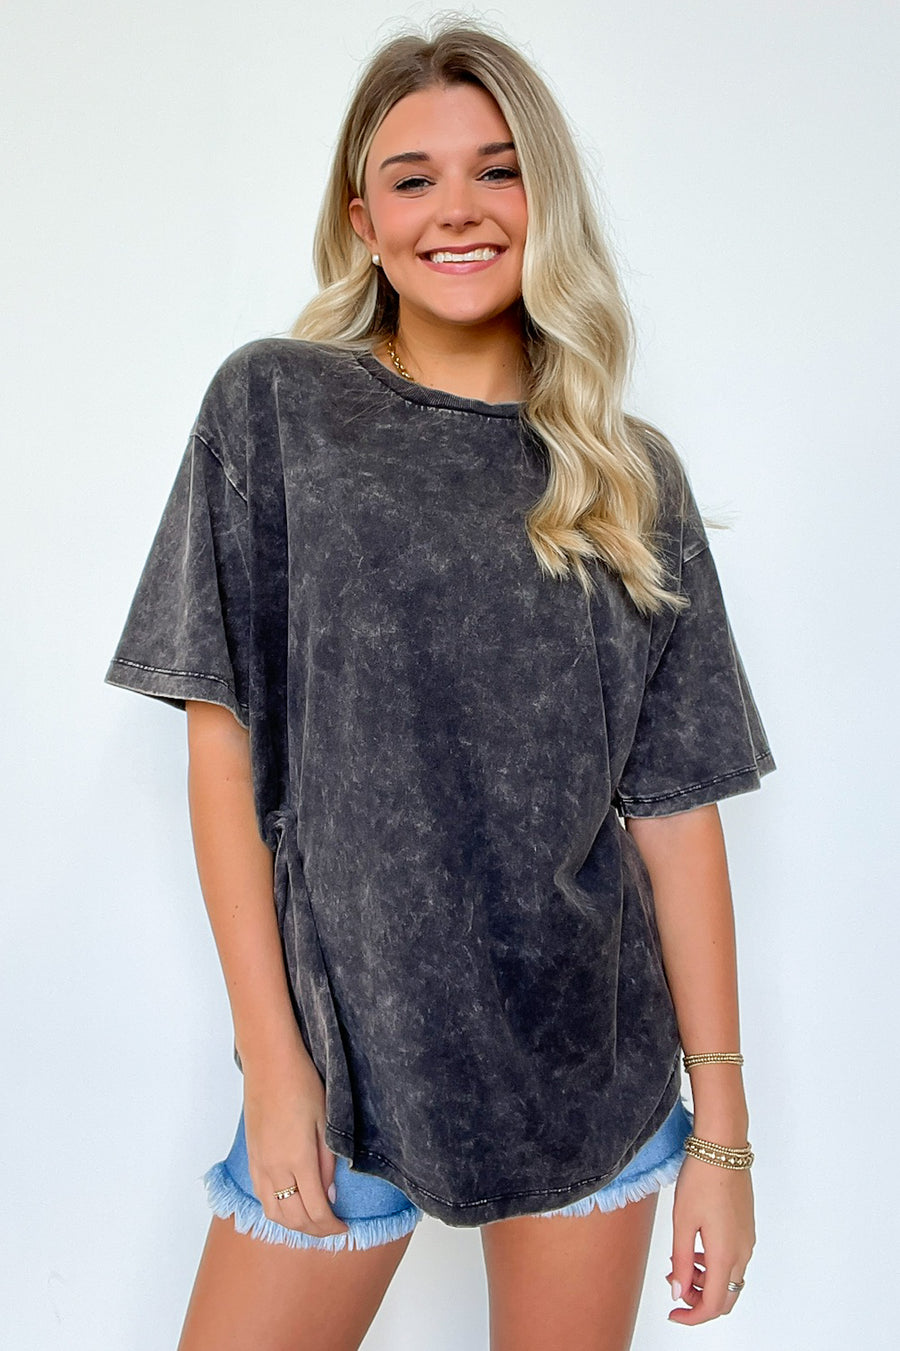 Ash Black / SM Melena Mineral Washed Oversized Top - BACK IN STOCK - Madison and Mallory